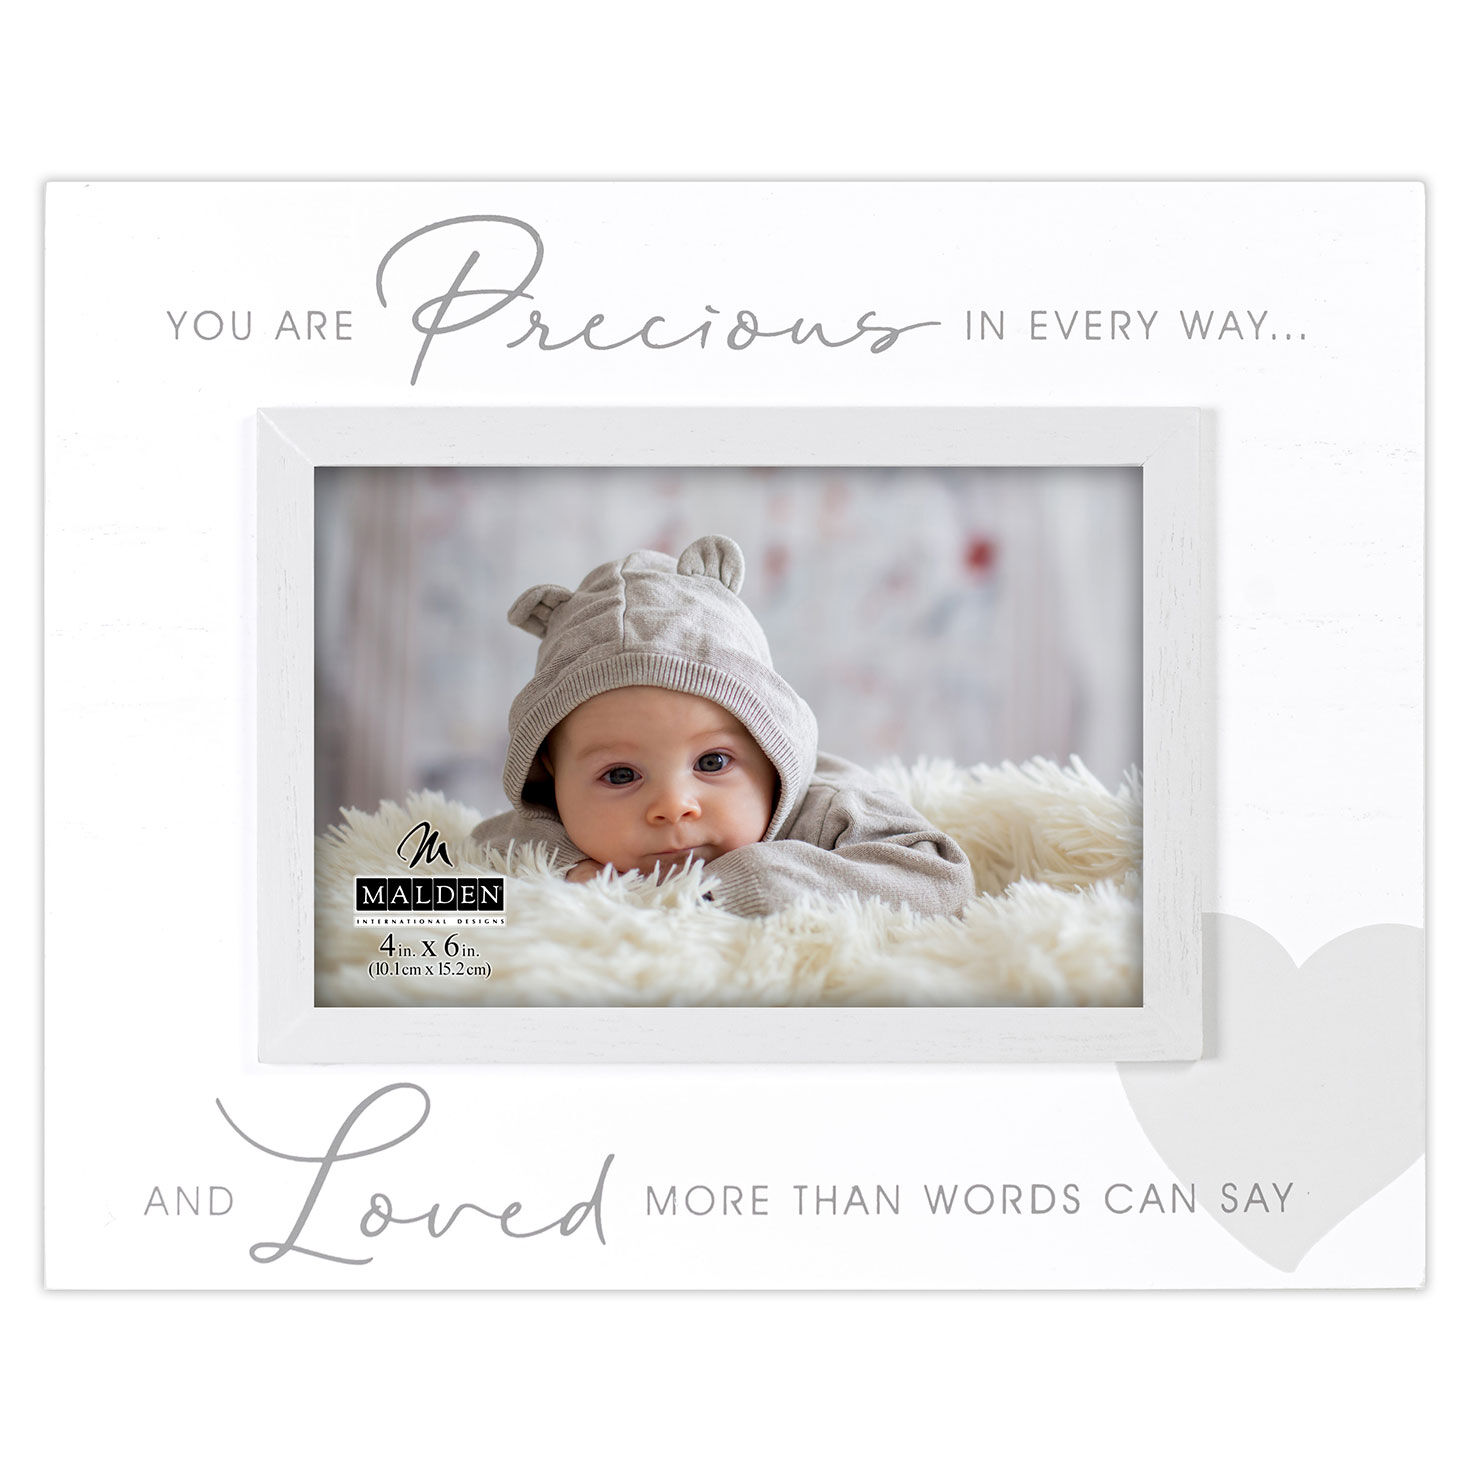 https://www.hallmark.com/dw/image/v2/AALB_PRD/on/demandware.static/-/Sites-hallmark-master/default/dwd6ab7eae/images/finished-goods/products/353046/Malden-Precious-Baby-Rustic-Picture-Frame_353046_01.jpg?sfrm=jpg